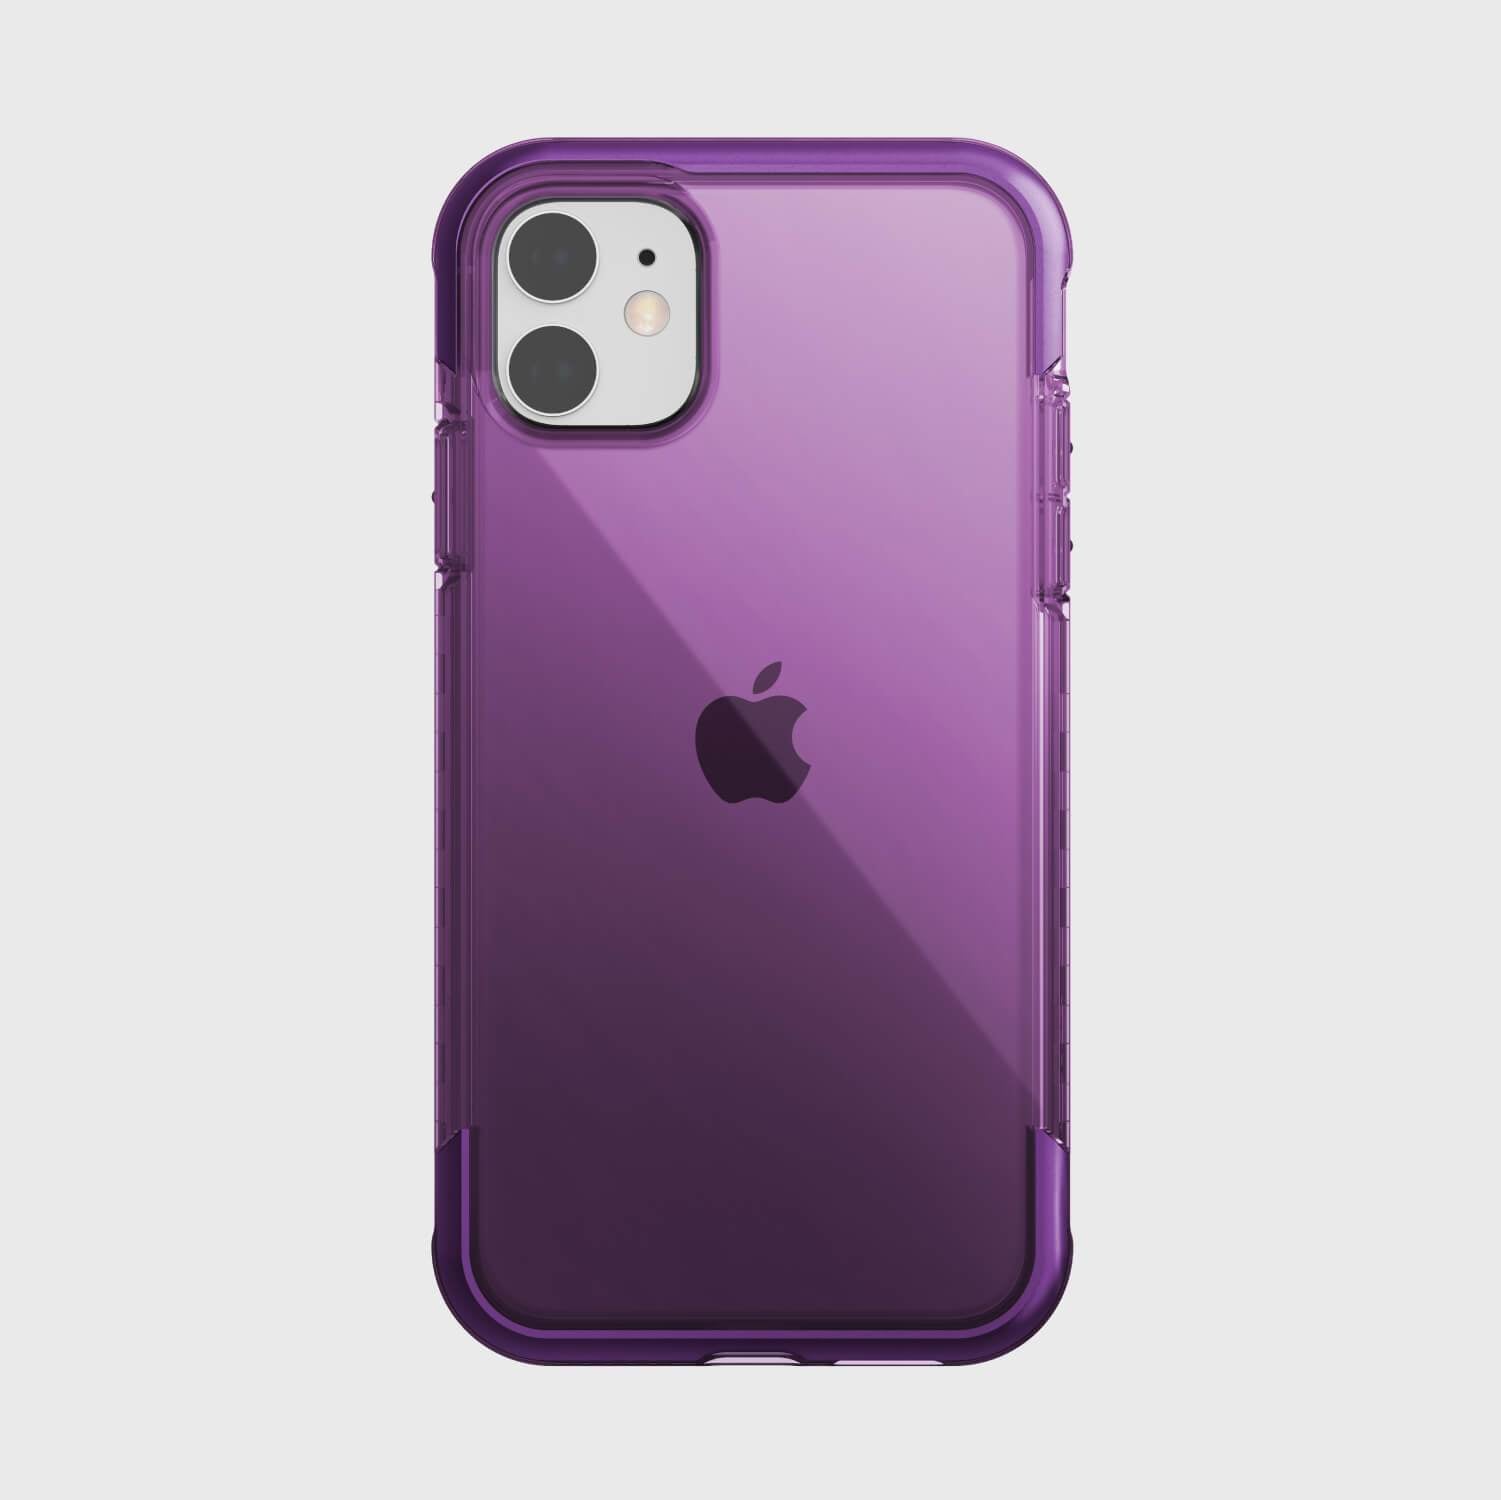 The purple Raptic iPhone 11 Case - AIR is shown on a white background.